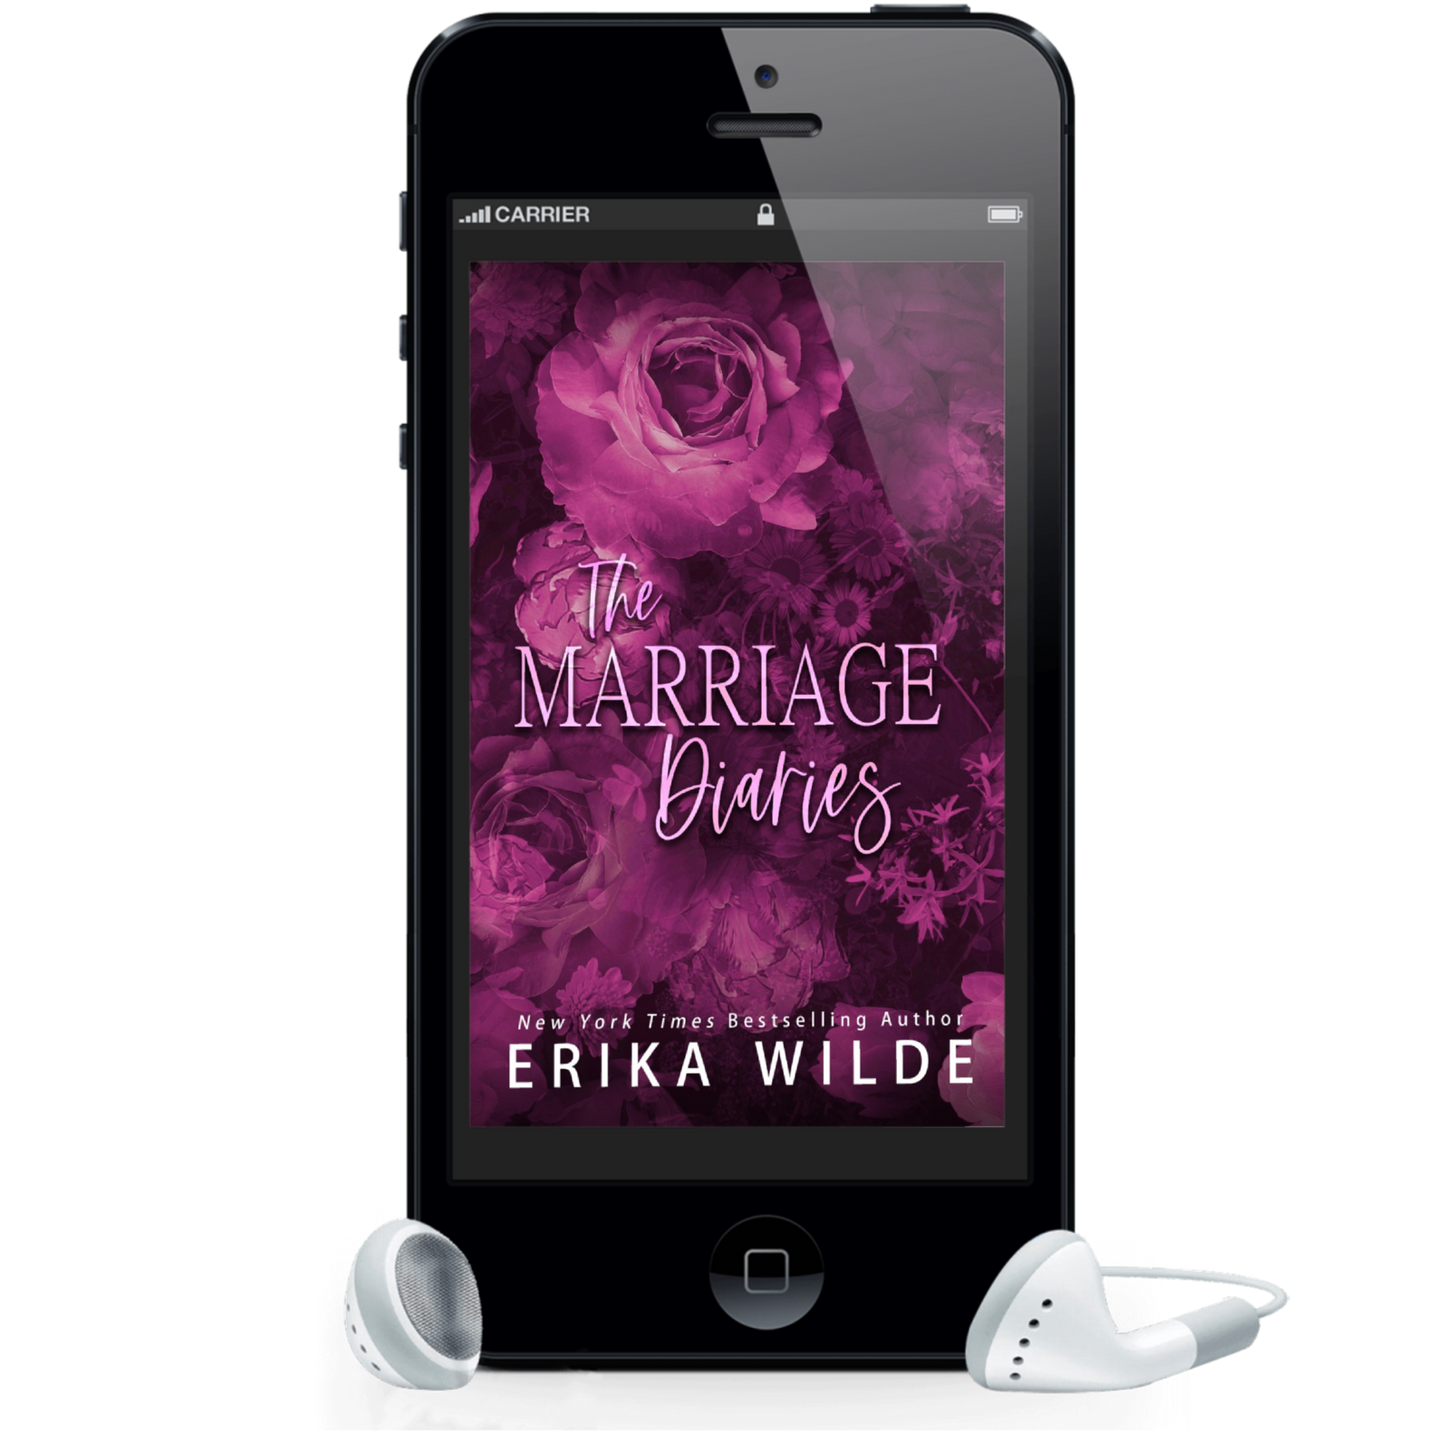 The Marriage Diaries Audiobook